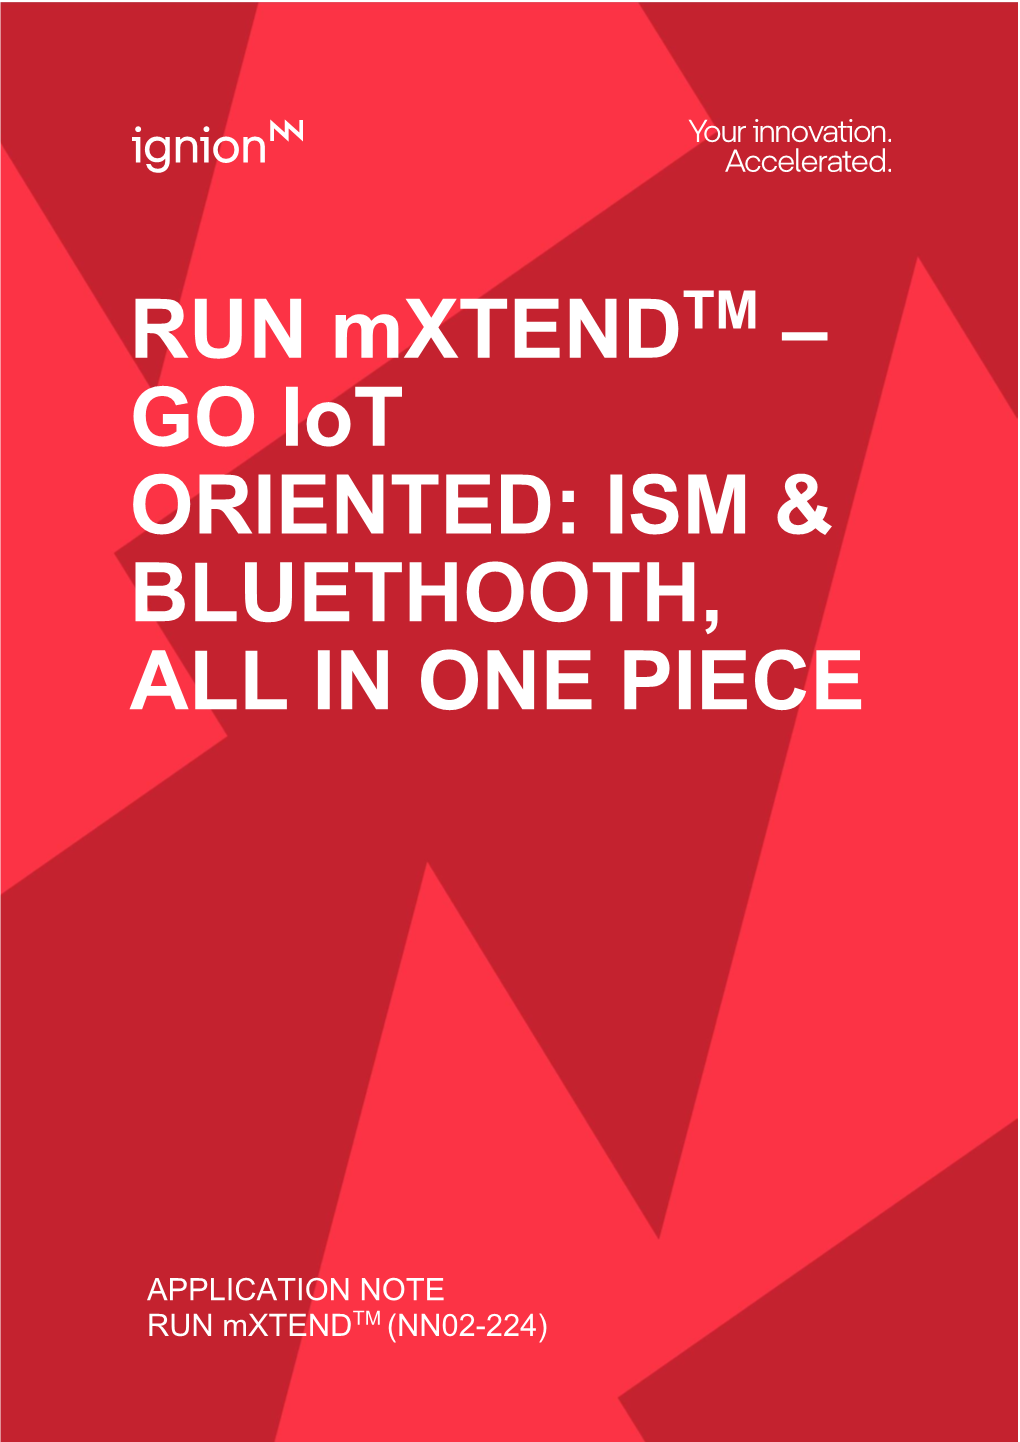 RUN Mxtend GO Iot ORIENTED: ISM & BLUETHOOTH, ALL in ONE PIECE